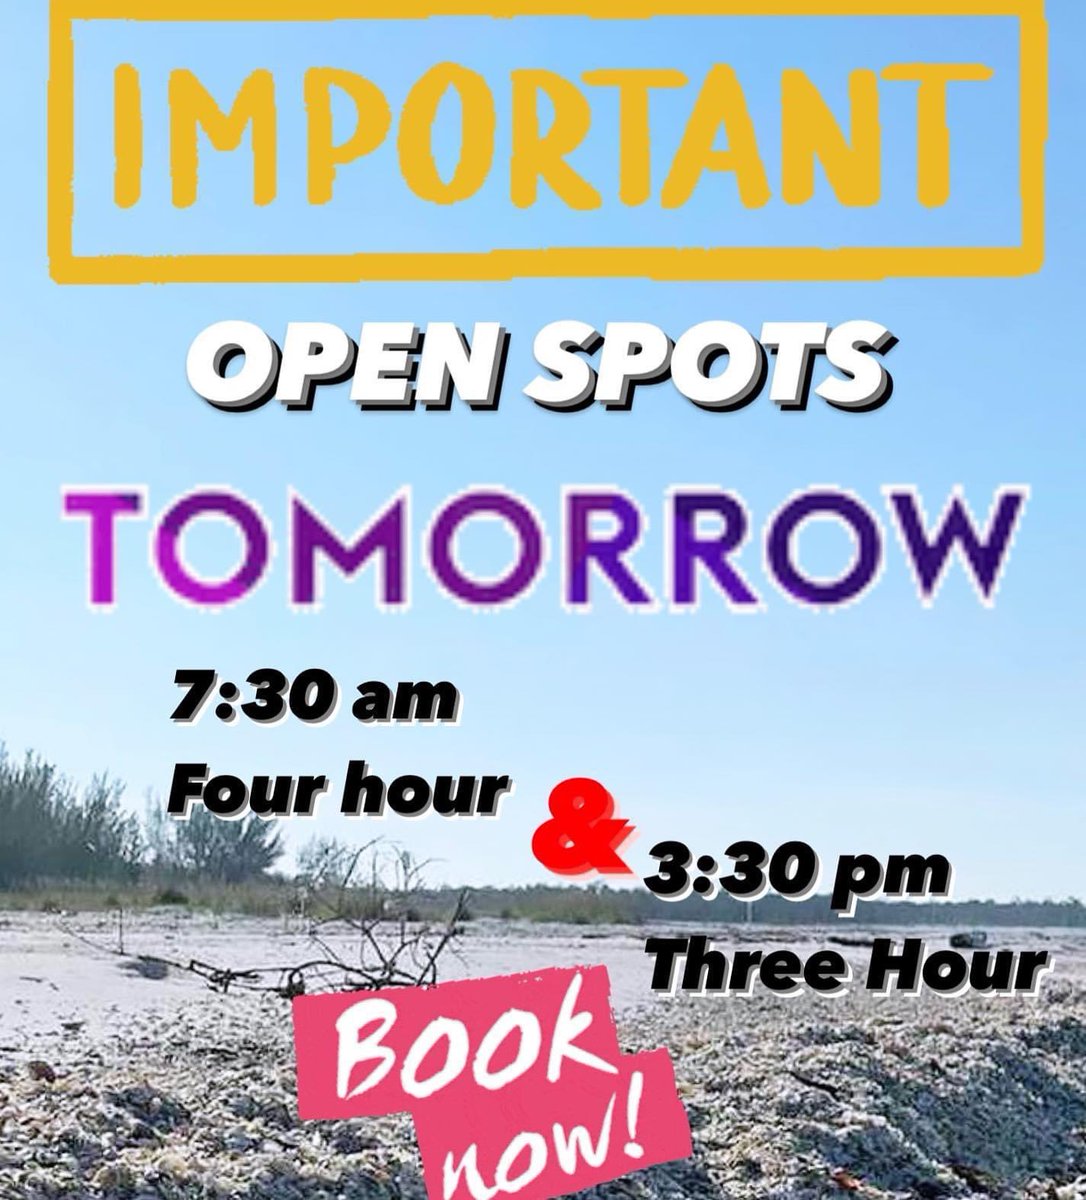 OPEN SPOTS Tomorrow on our 7:30 am Four Hour Shared 🐚Tour & OPENINGS on our 3:30 pm Three Hour Shared 🐚Tour. You can Book Online or Call : 239-571-2331 treasureseekersshelltours.com
#treasureseekersfl 
#shells #floridalife #shellmarcoisland #shellkiceisland #treasureseekershelltours